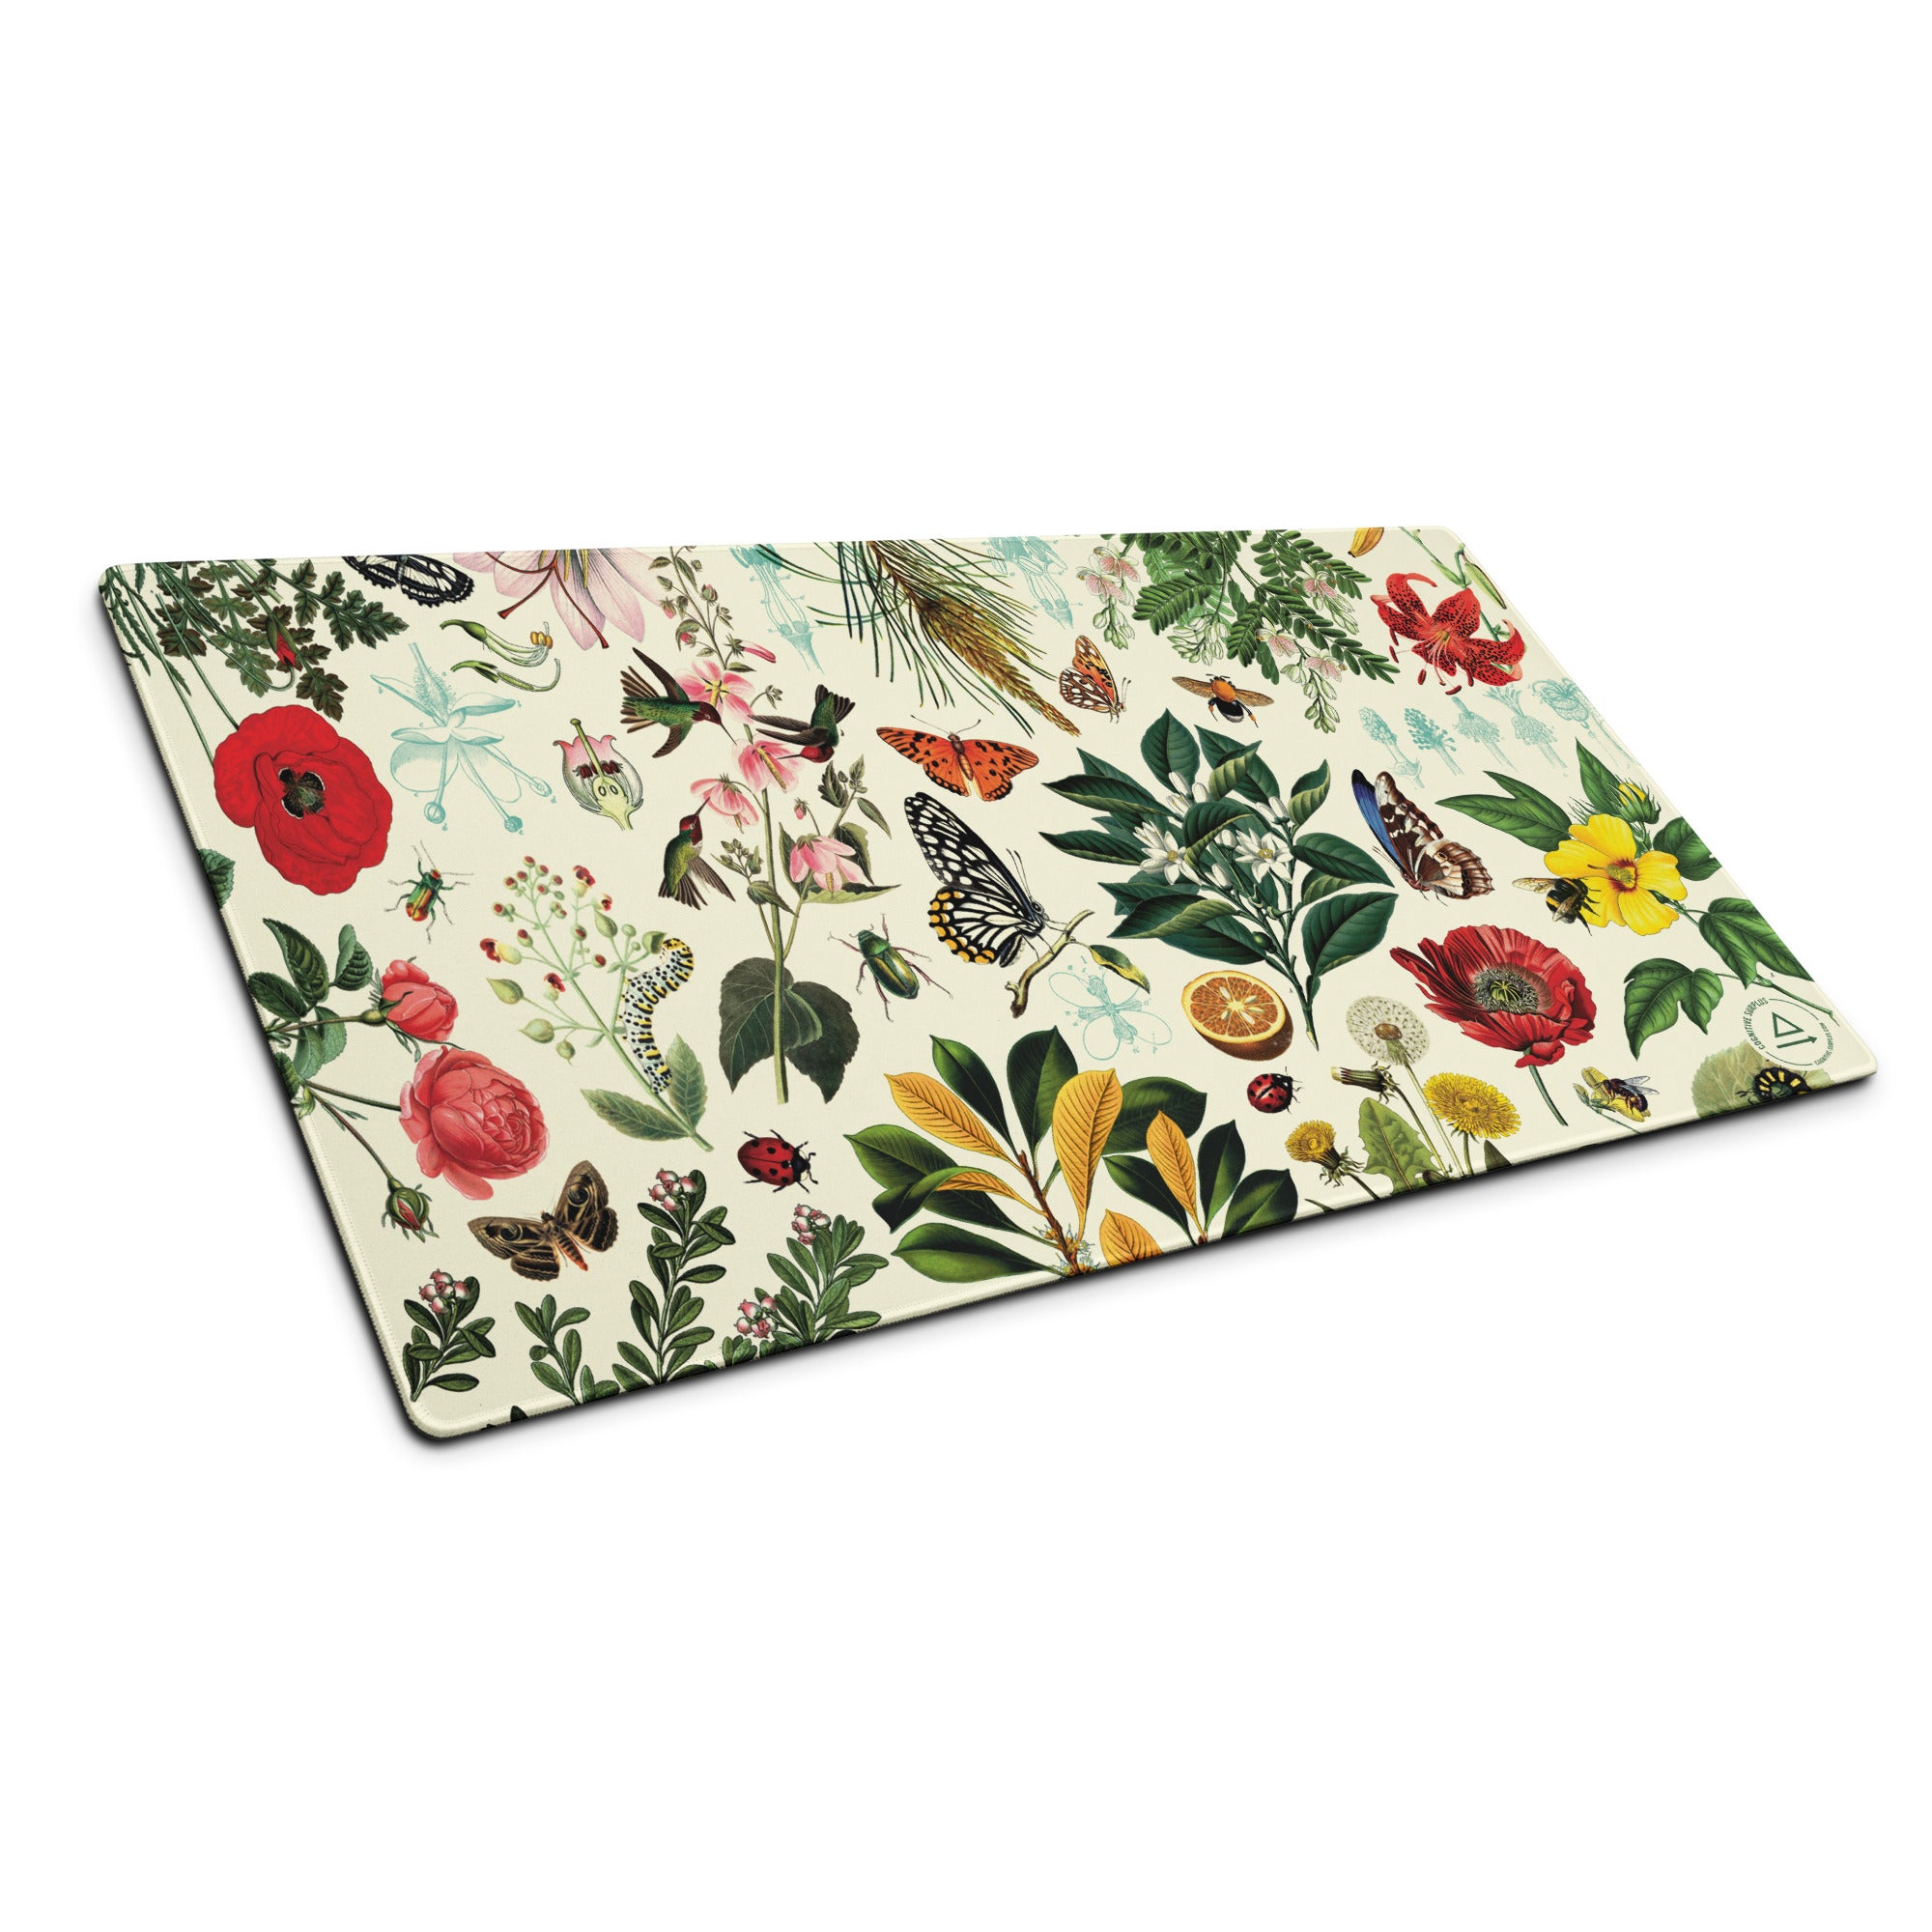 gaming-mouse-pad-white-36x18-front-6595e0548870a.jpg